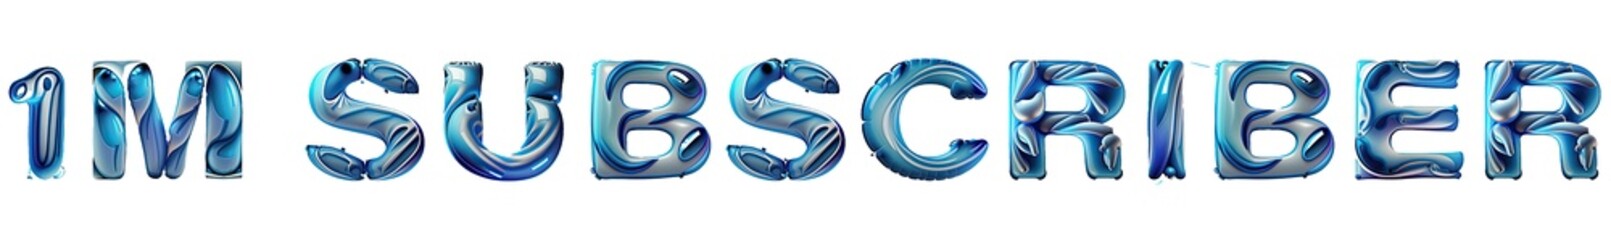 Blue Inflatable Balloons Spelling "1M Subscribers" on White Background,3D Illustration for Social Network friends, followers, Web user Thank you celebrate of subscribers or followers, Subscribers